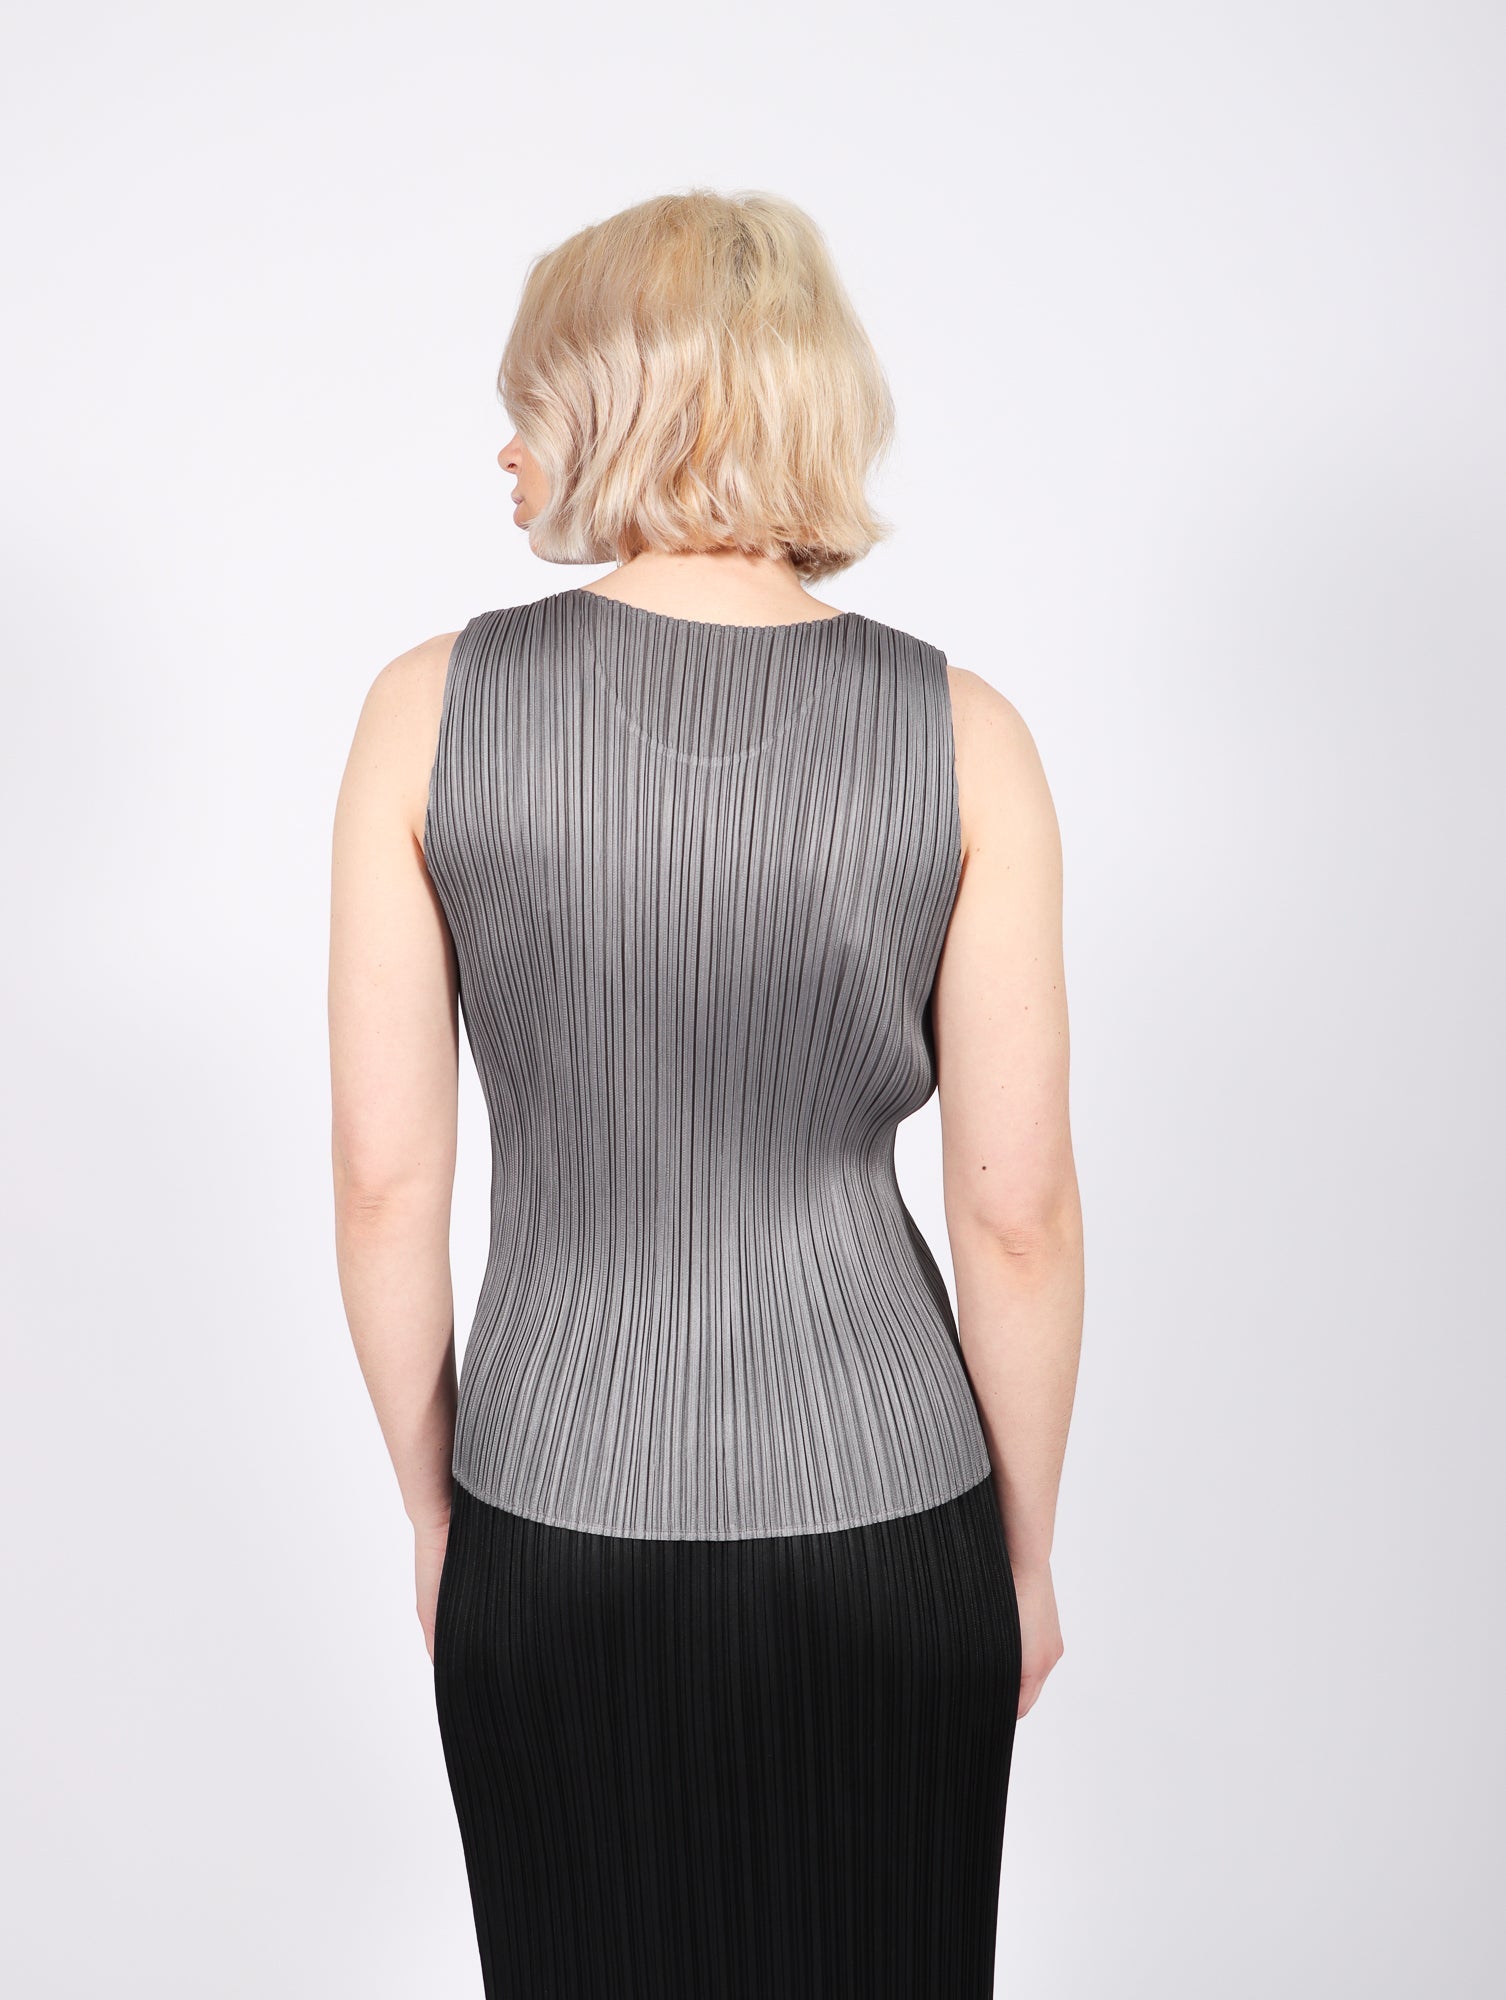 Basics Tank Top in Gray by Pleats Please Issey Miyake – Idlewild